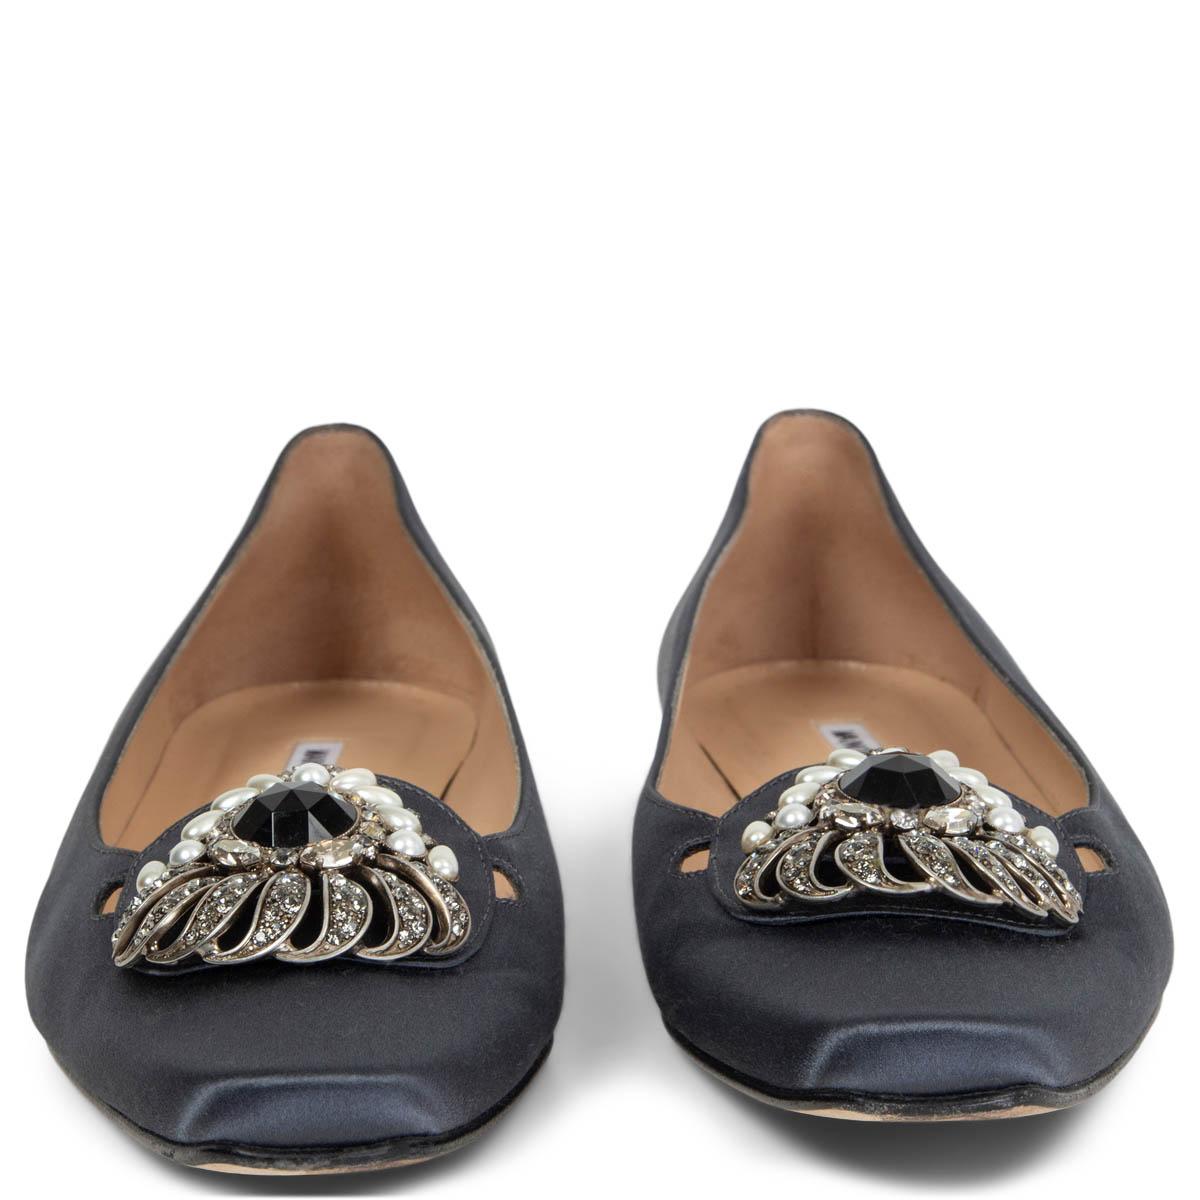 100% authentic Manolo Blahnik ballet flats in charcoal satin embellished with pearls, chrystals and a black stone. Have been worn and are in excellent condition. 

Measurements
Imprinted Size	39
Shoe Size	39
Inside Sole	26cm (10.1in)
Width	8cm